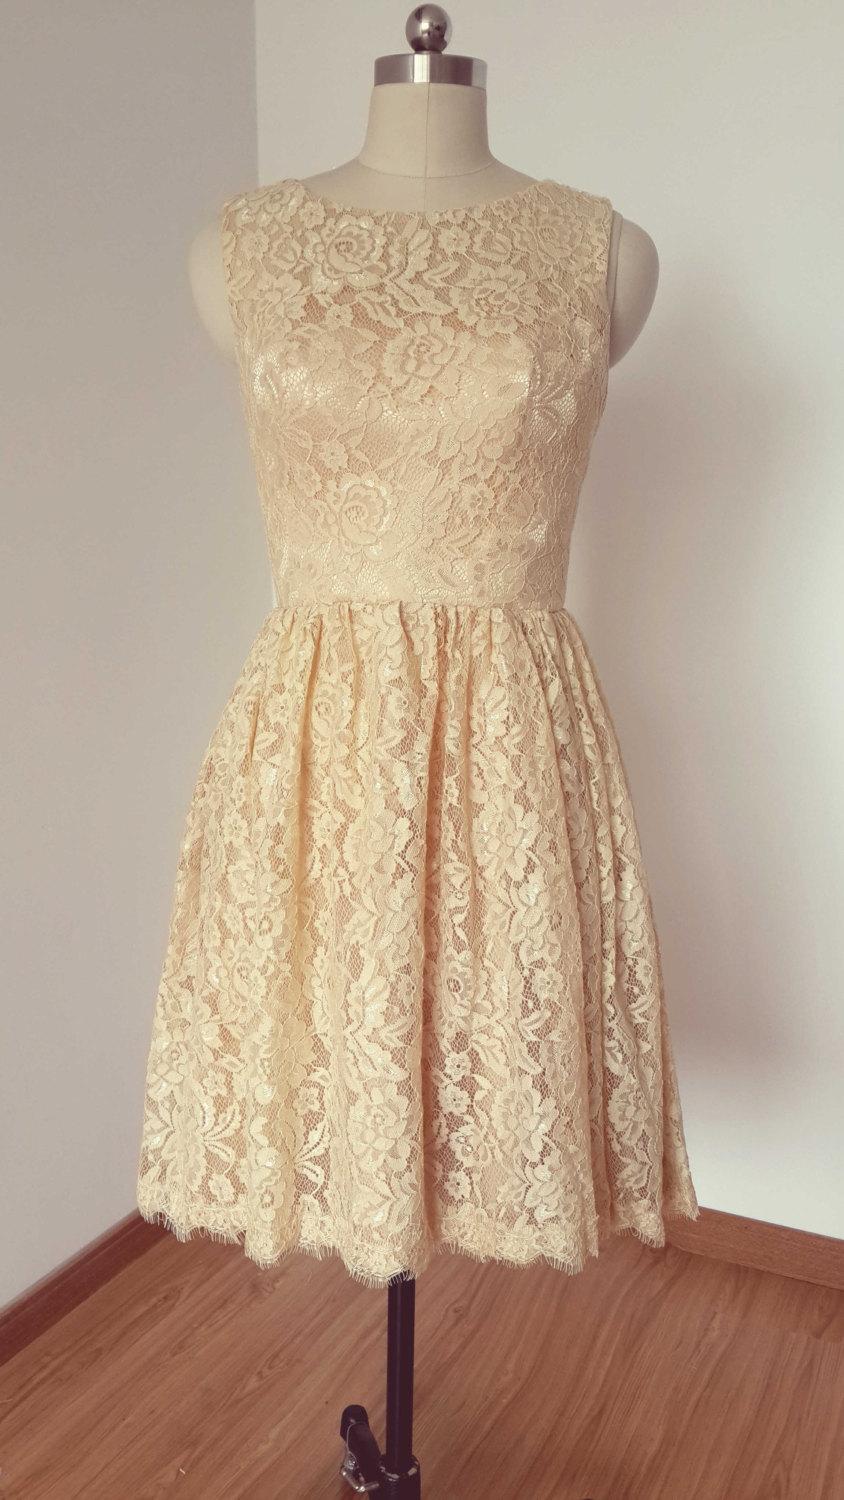 Mariage - 2015 A-line Light Champagne Lace Short Bridesmaid Dress with Back Buttons